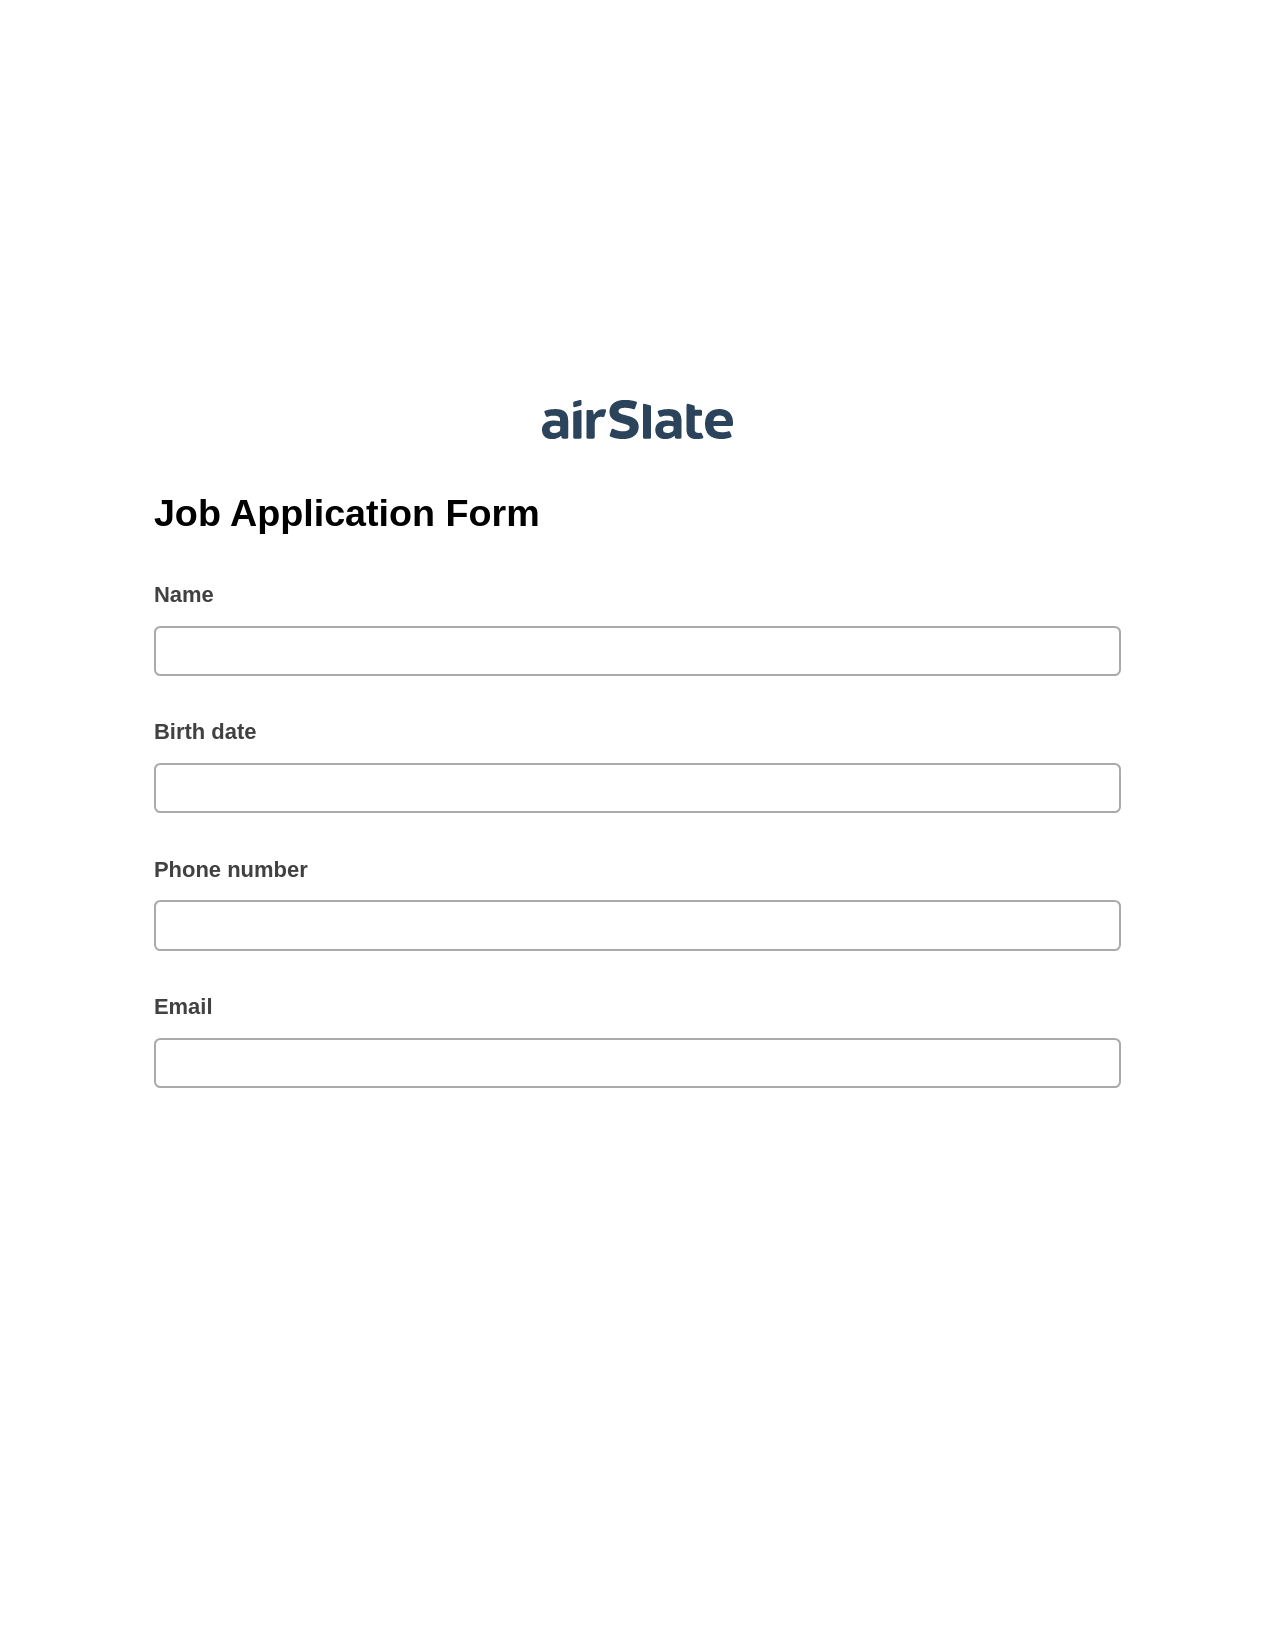 Multirole Job Application Form Pre-fill from CSV File Dropdown Options Bot, System Bot - Create a Slate in another Flow, Export to NetSuite Record Bot